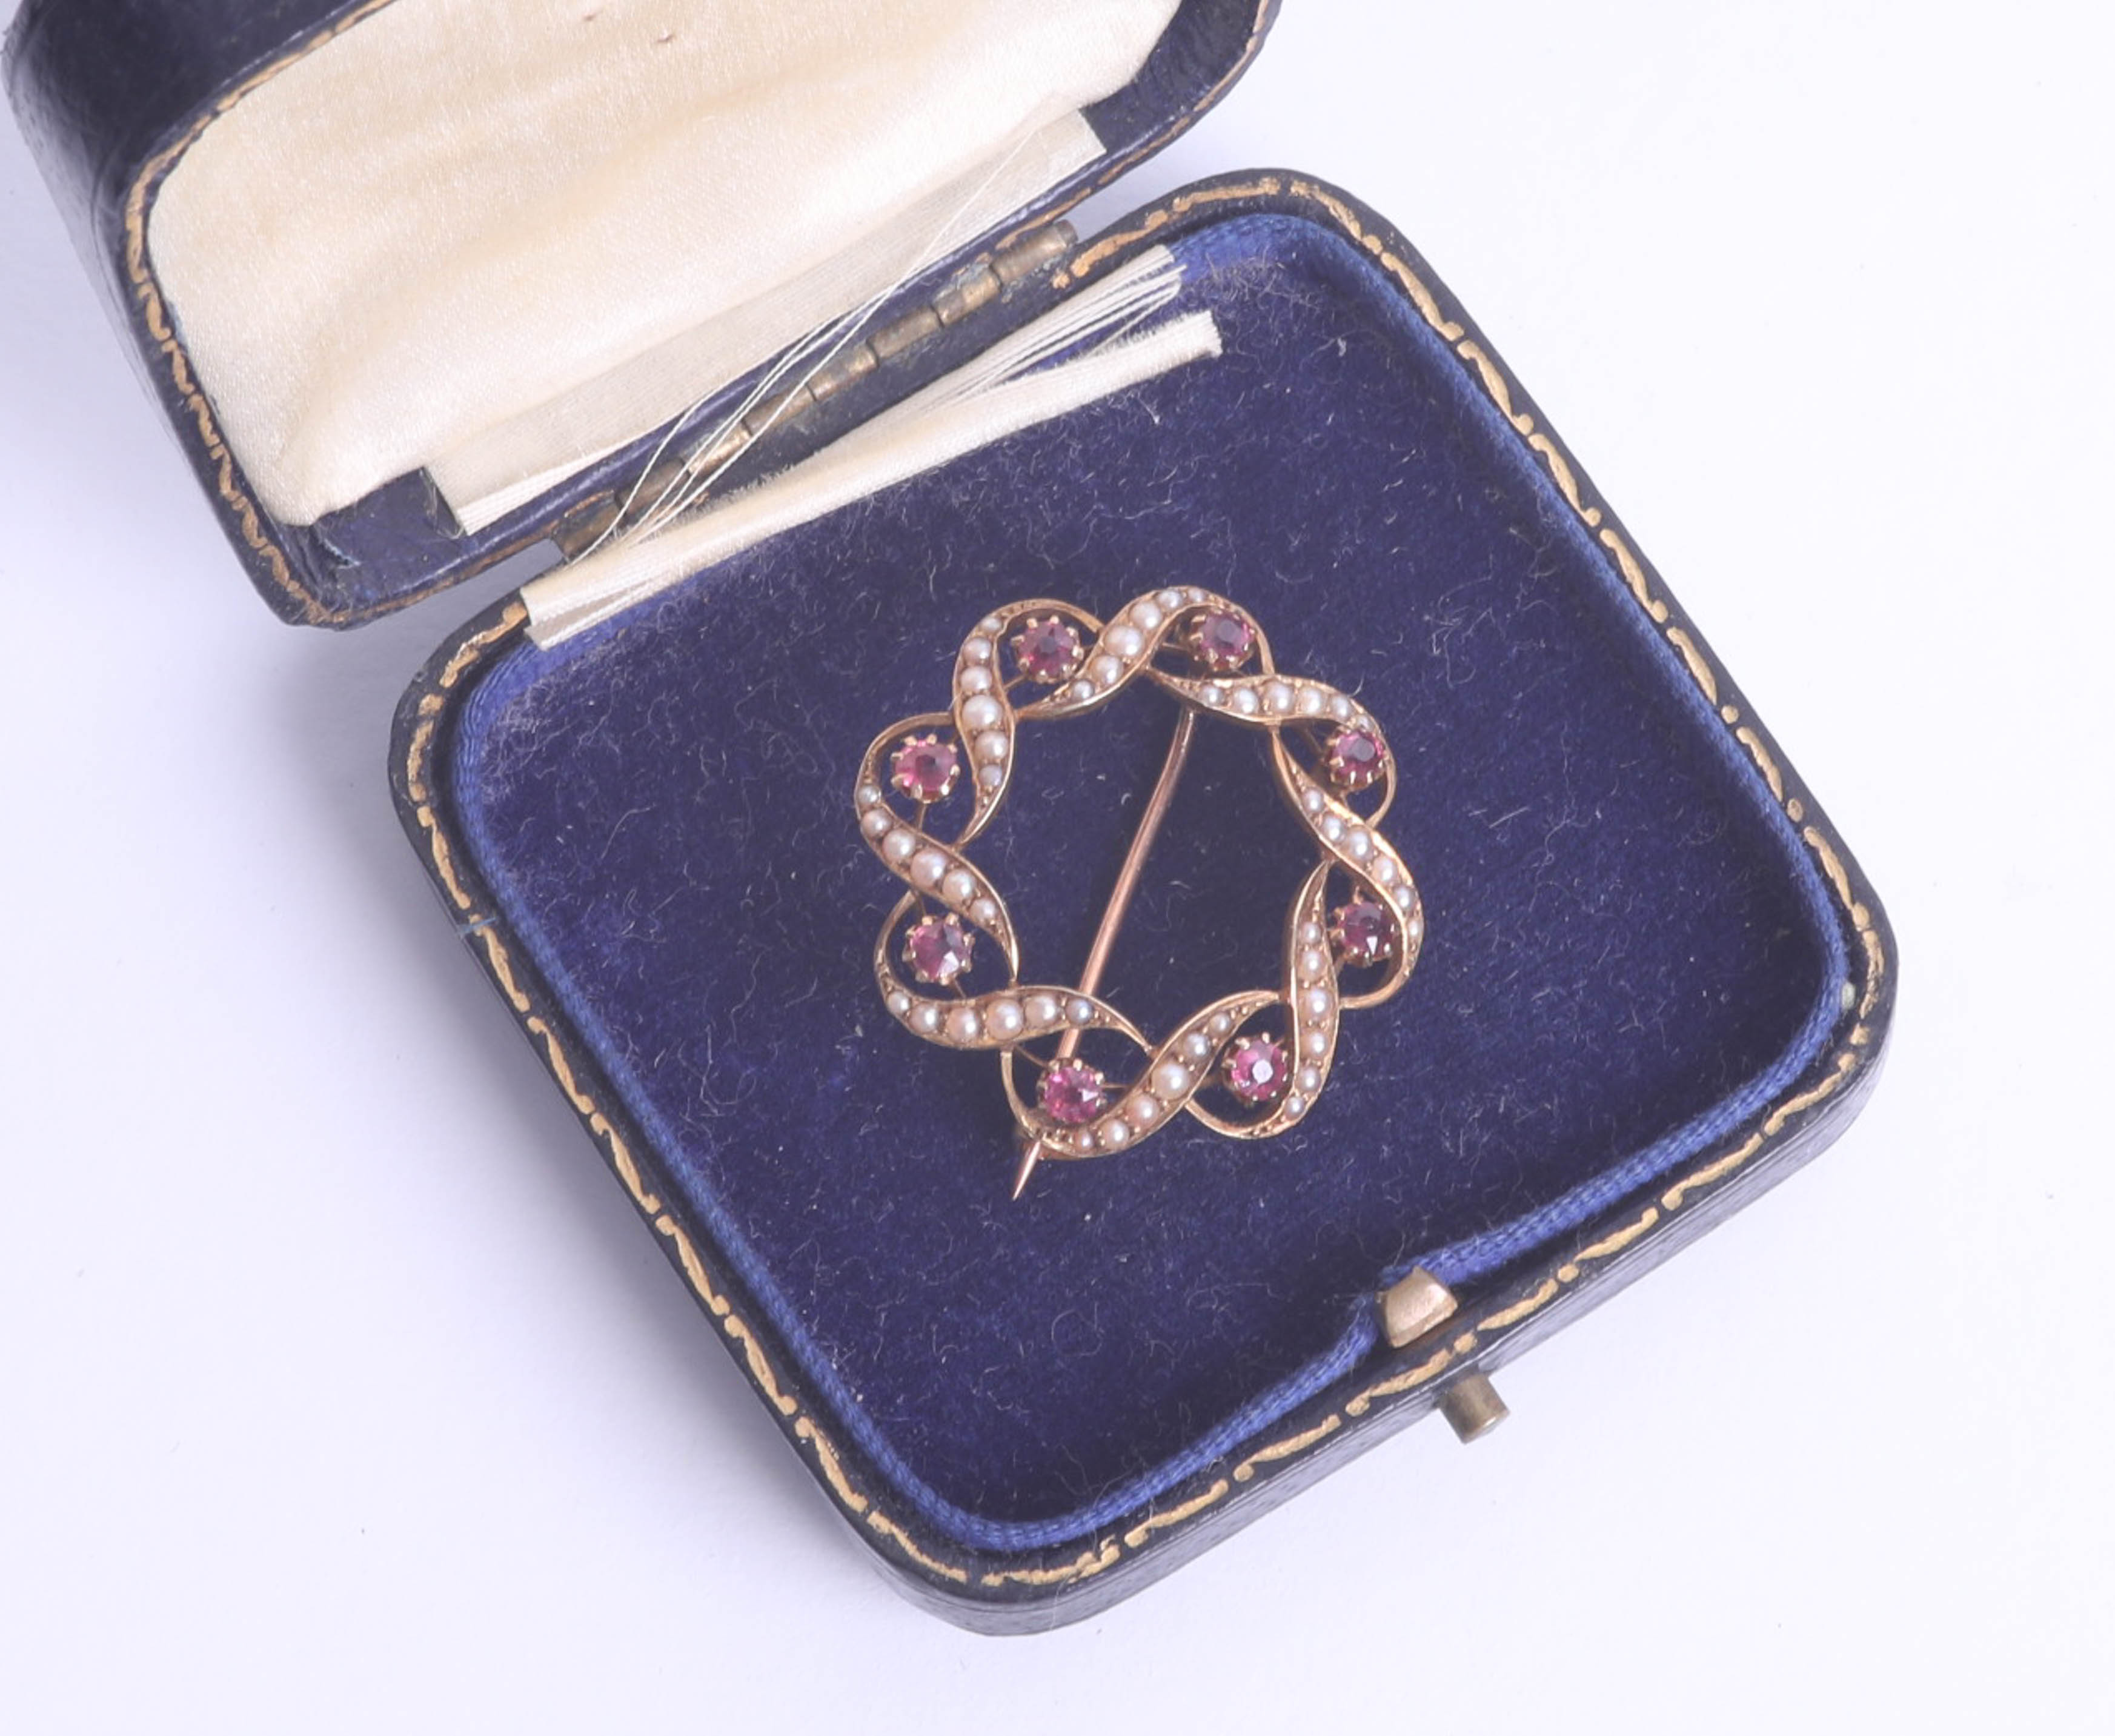 A 15ct ruby and seed pearl brooch diameter 25mm, 4.4g. - Image 2 of 3